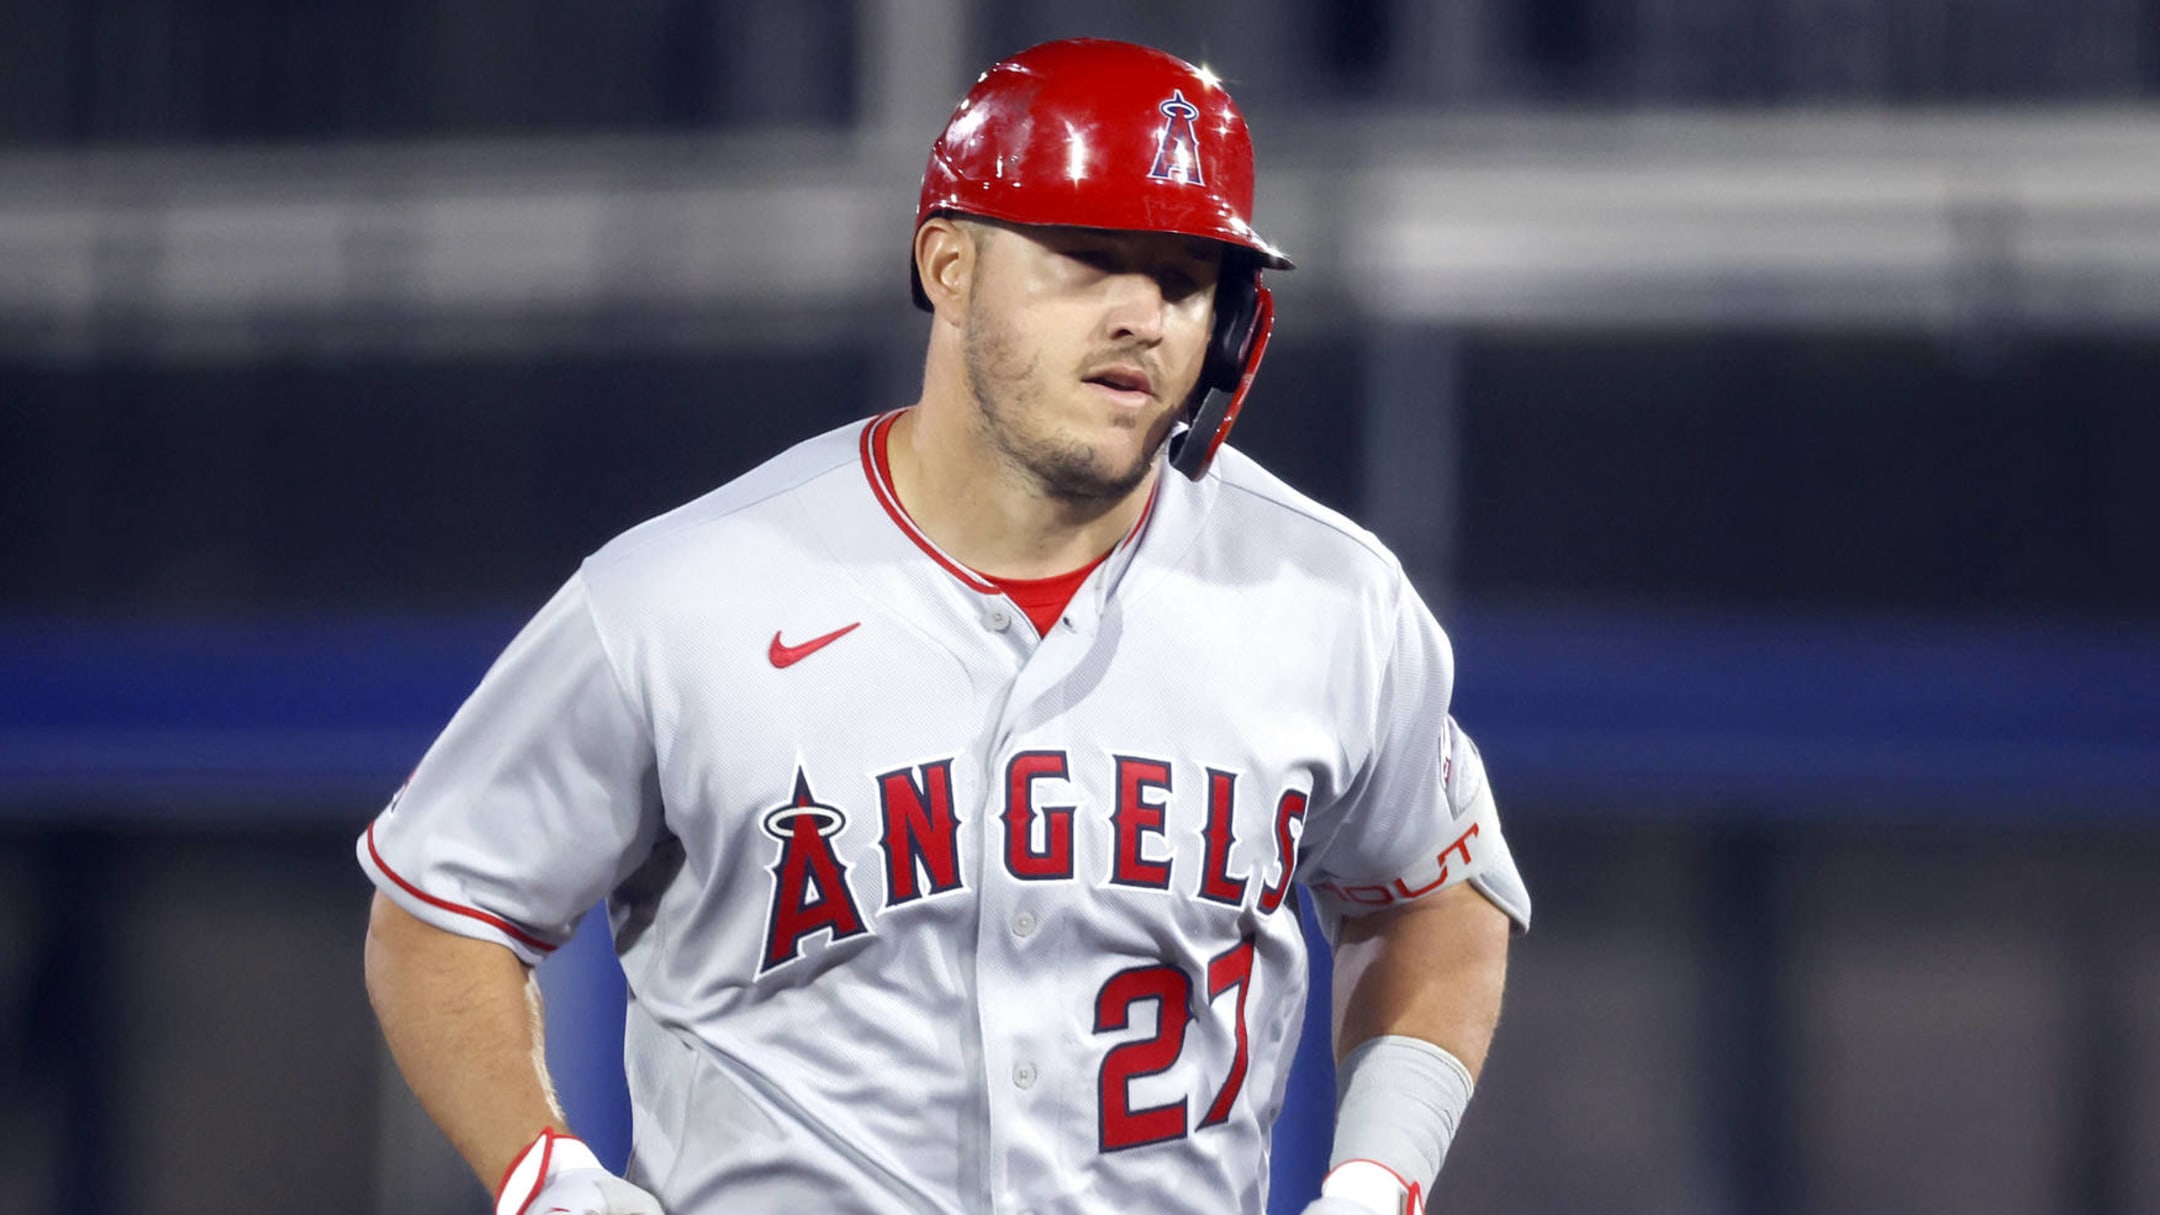 Where Did Mike Trout Go to College?